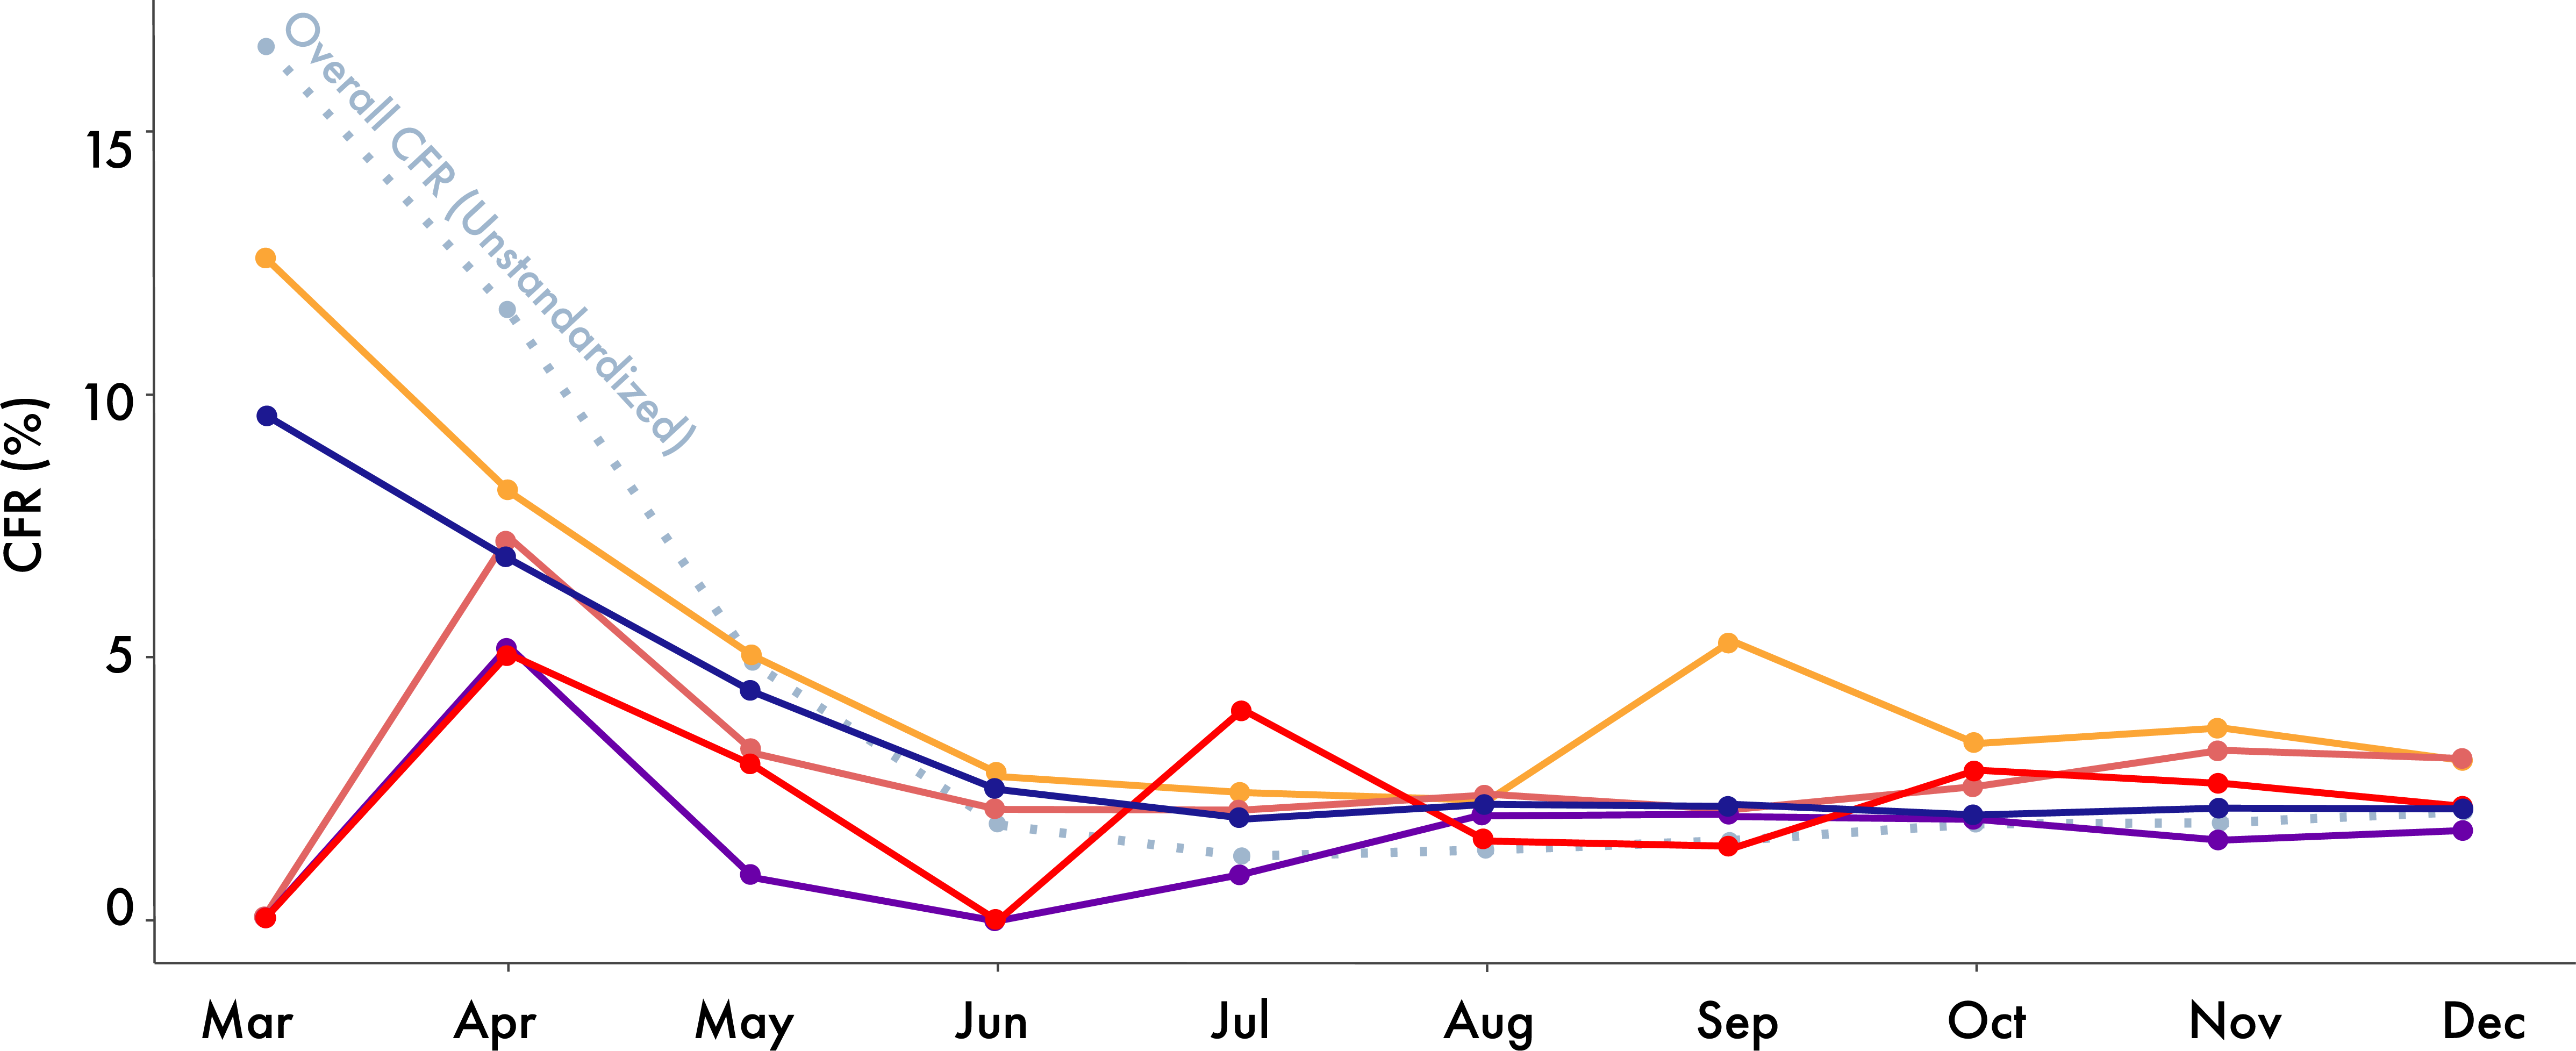 line chart that shows the CFR% of Black, White, Asian or Pacific Islander, Native, Other, and White populations from March to December